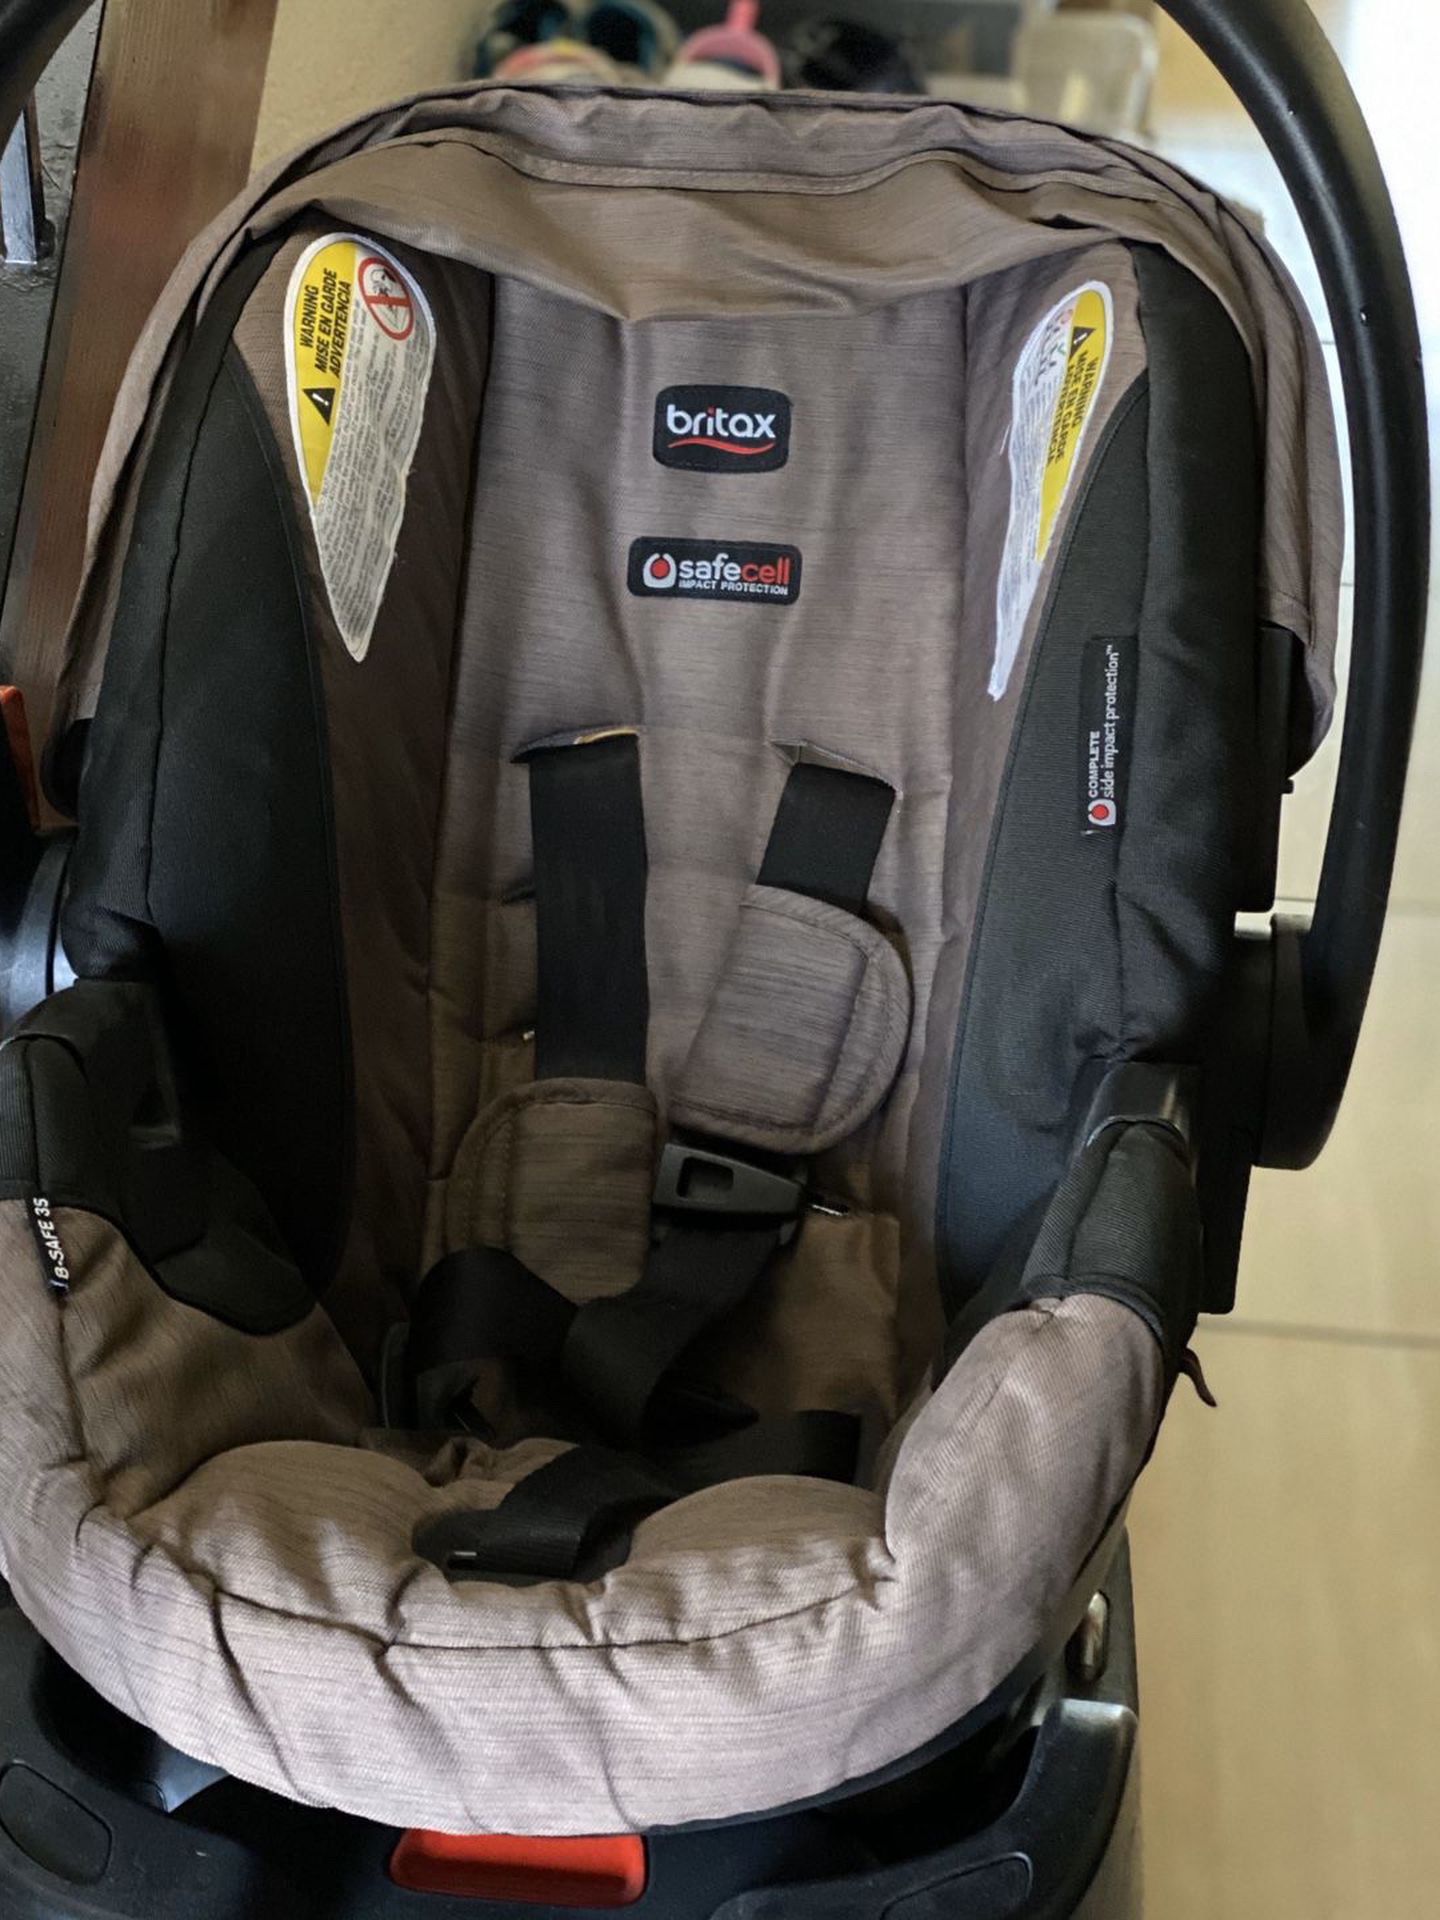 Britax Infant Car Seat With 2 Car Bases